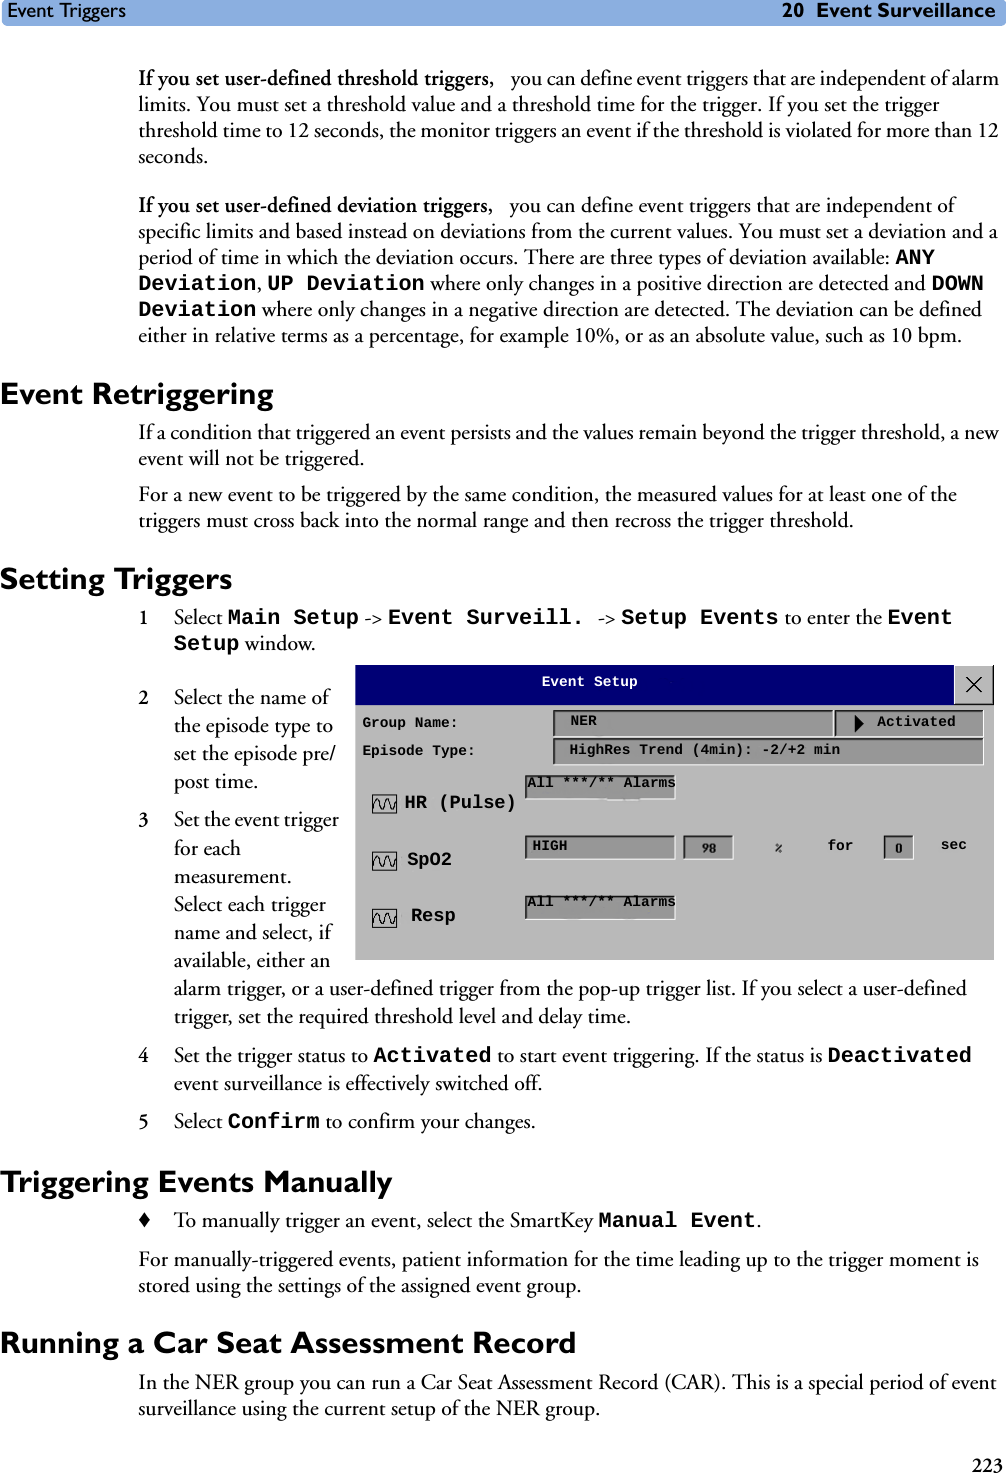 Event Triggers 20 Event Surveillance223If you set user-defined threshold triggers,  you can define event triggers that are independent of alarm limits. You must set a threshold value and a threshold time for the trigger. If you set the trigger threshold time to 12 seconds, the monitor triggers an event if the threshold is violated for more than 12 seconds.If you set user-defined deviation triggers,  you can define event triggers that are independent of specific limits and based instead on deviations from the current values. You must set a deviation and a period of time in which the deviation occurs. There are three types of deviation available: ANY Deviation, UP Deviation where only changes in a positive direction are detected and DOWN Deviation where only changes in a negative direction are detected. The deviation can be defined either in relative terms as a percentage, for example 10%, or as an absolute value, such as 10 bpm. Event RetriggeringIf a condition that triggered an event persists and the values remain beyond the trigger threshold, a new event will not be triggered.For a new event to be triggered by the same condition, the measured values for at least one of the triggers must cross back into the normal range and then recross the trigger threshold.Setting Triggers 1Select Main Setup -&gt; Event Surveill. -&gt; Setup Events to enter the Event Setup window.2Select the name of the episode type to set the episode pre/post time.3Set the event trigger for each measurement. Select each trigger name and select, if available, either an alarm trigger, or a user-defined trigger from the pop-up trigger list. If you select a user-defined trigger, set the required threshold level and delay time. 4Set the trigger status to Activated to start event triggering. If the status is Deactivated event surveillance is effectively switched off.5Select Confirm to confirm your changes.Triggering Events Manually ♦To manually trigger an event, select the SmartKey Manual Event.For manually-triggered events, patient information for the time leading up to the trigger moment is stored using the settings of the assigned event group. Running a Car Seat Assessment RecordIn the NER group you can run a Car Seat Assessment Record (CAR). This is a special period of event surveillance using the current setup of the NER group. Group Name:Episode Type:NERHighRes Trend (4min): -2/+2 minAll ***/** AlarmsHIGHAll ***/** AlarmsHR (Pulse)SpO2RespEvent SetupActivatedfor sec